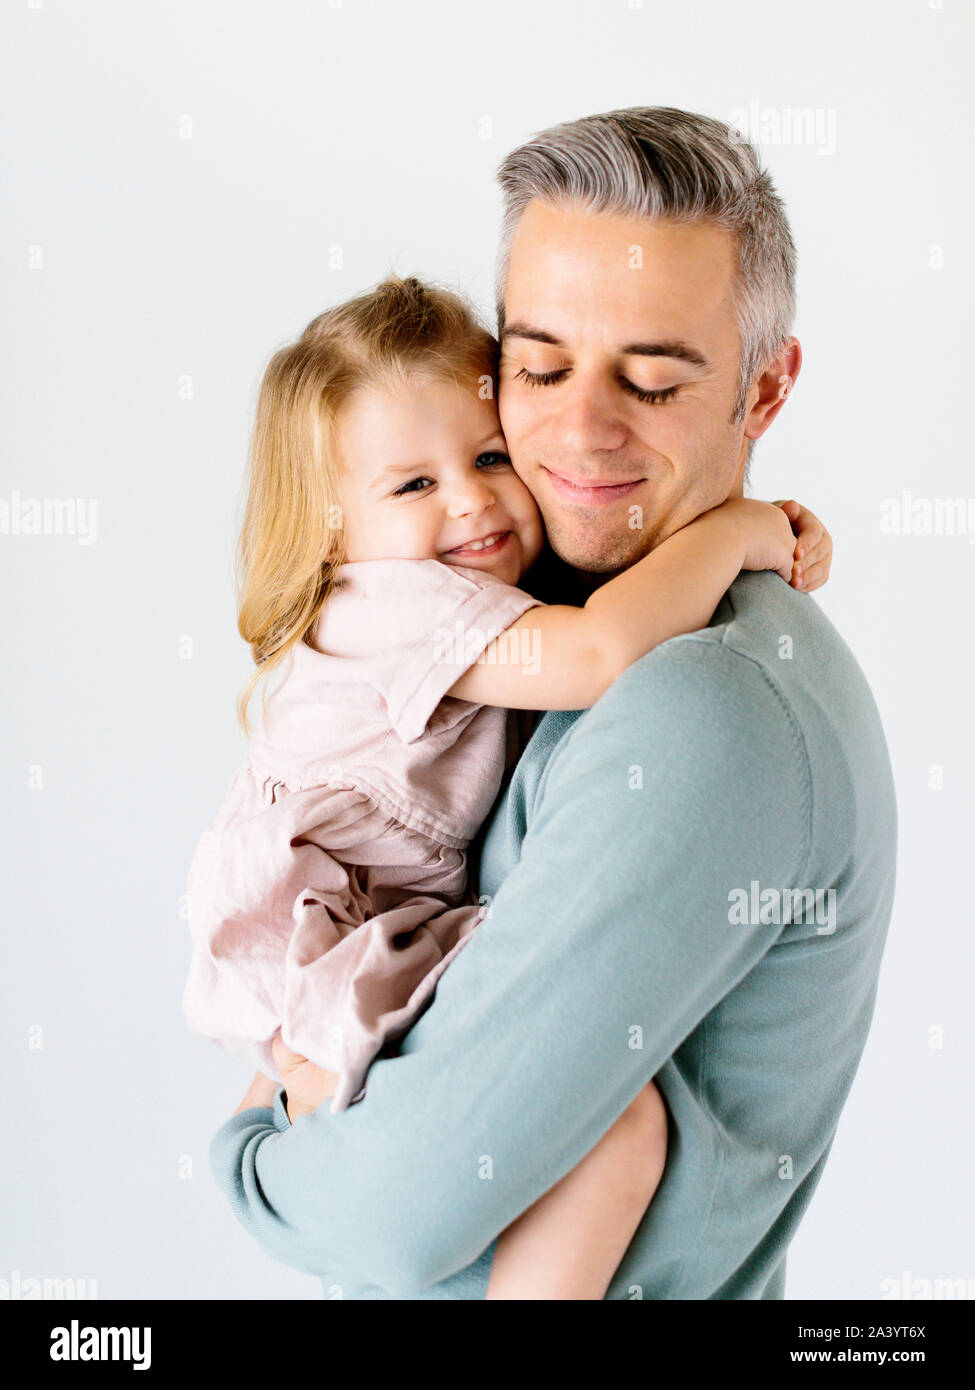 Smiling man holding his daughter Stock Photo